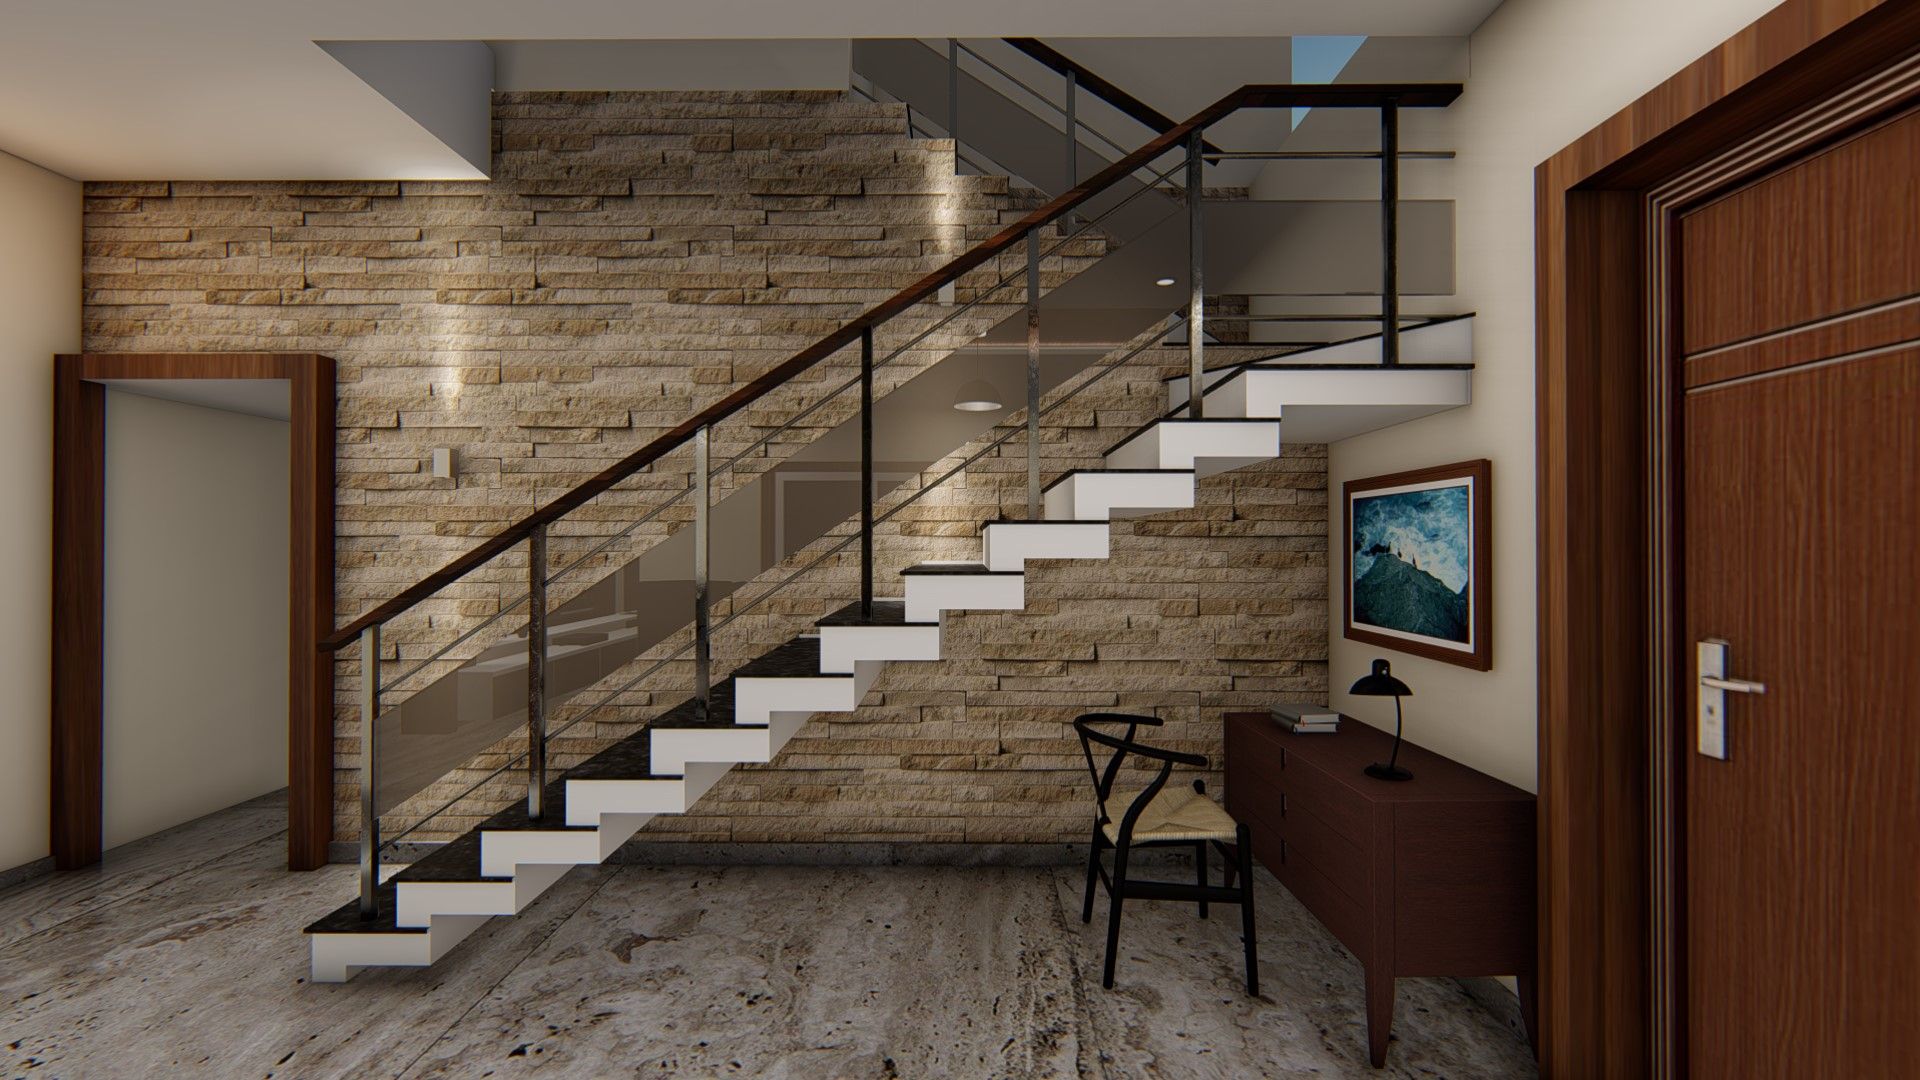 Staircase Design with wall cladding Cfolios Design And Construction Solutions Pvt Ltd Walls Tiles